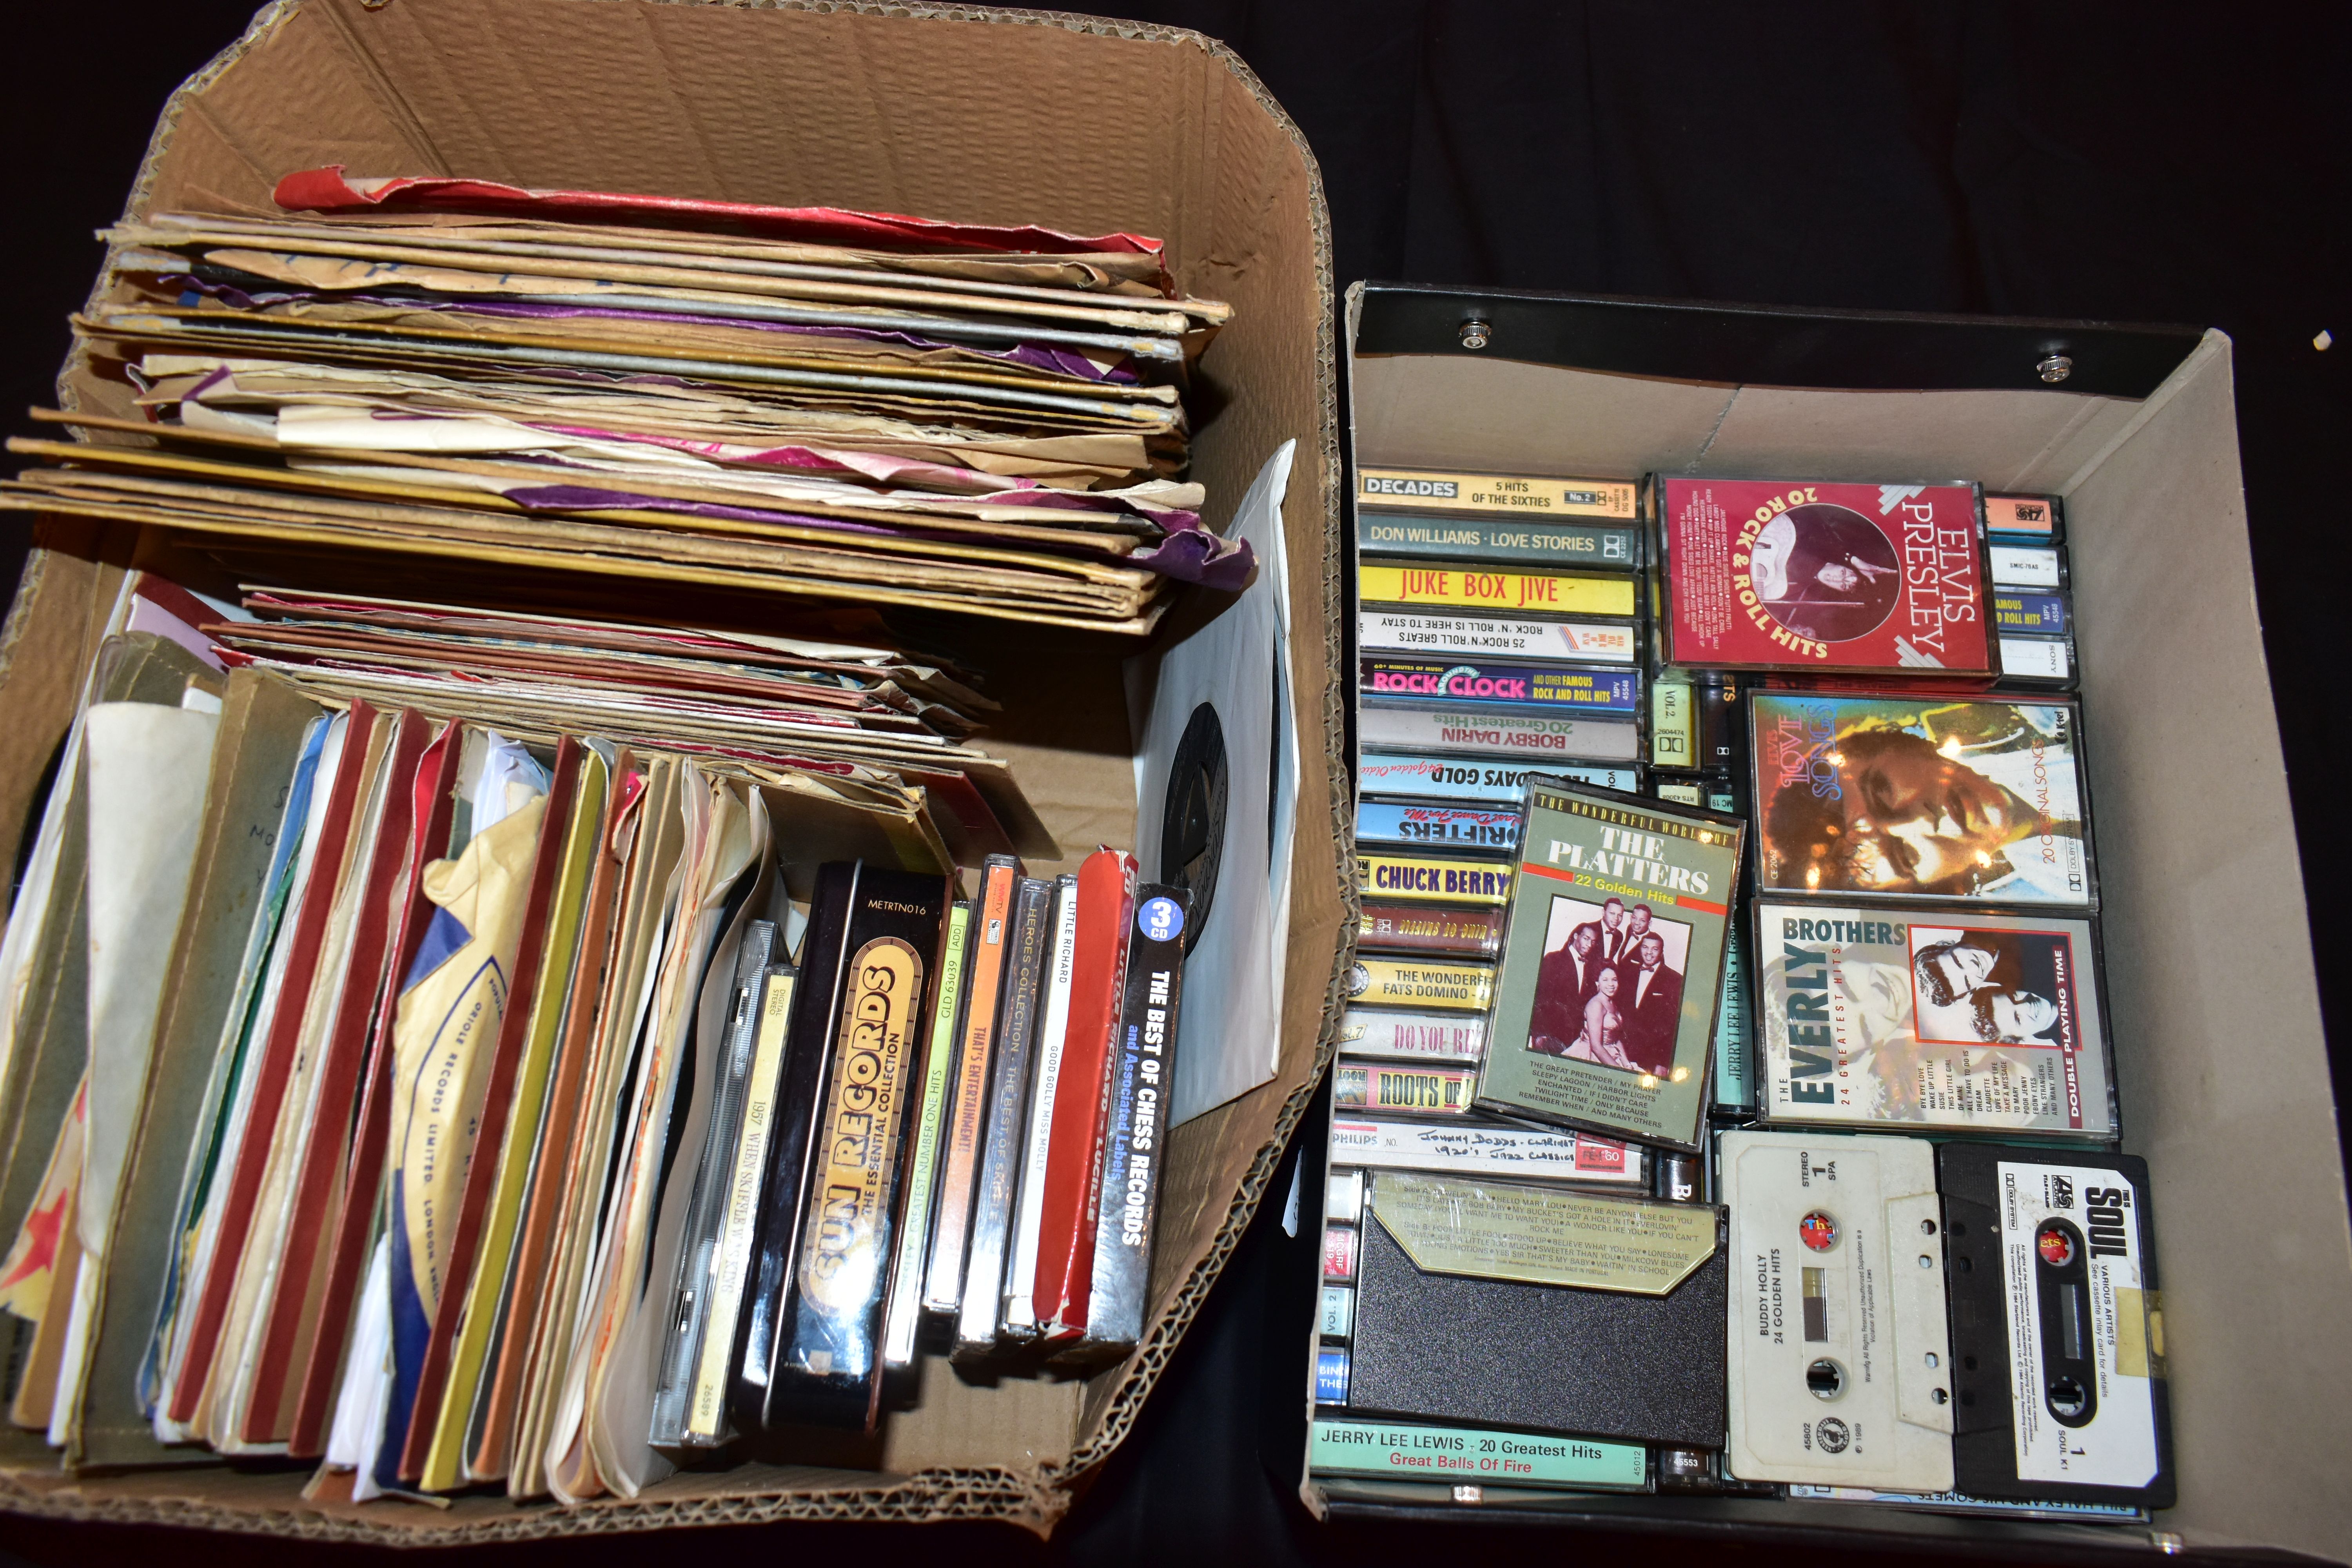 TWO TRAYS CONTAINING 78s, SINGLES, CDs, AND CASSETTE TAPES mostly from the 1950s and 60s including